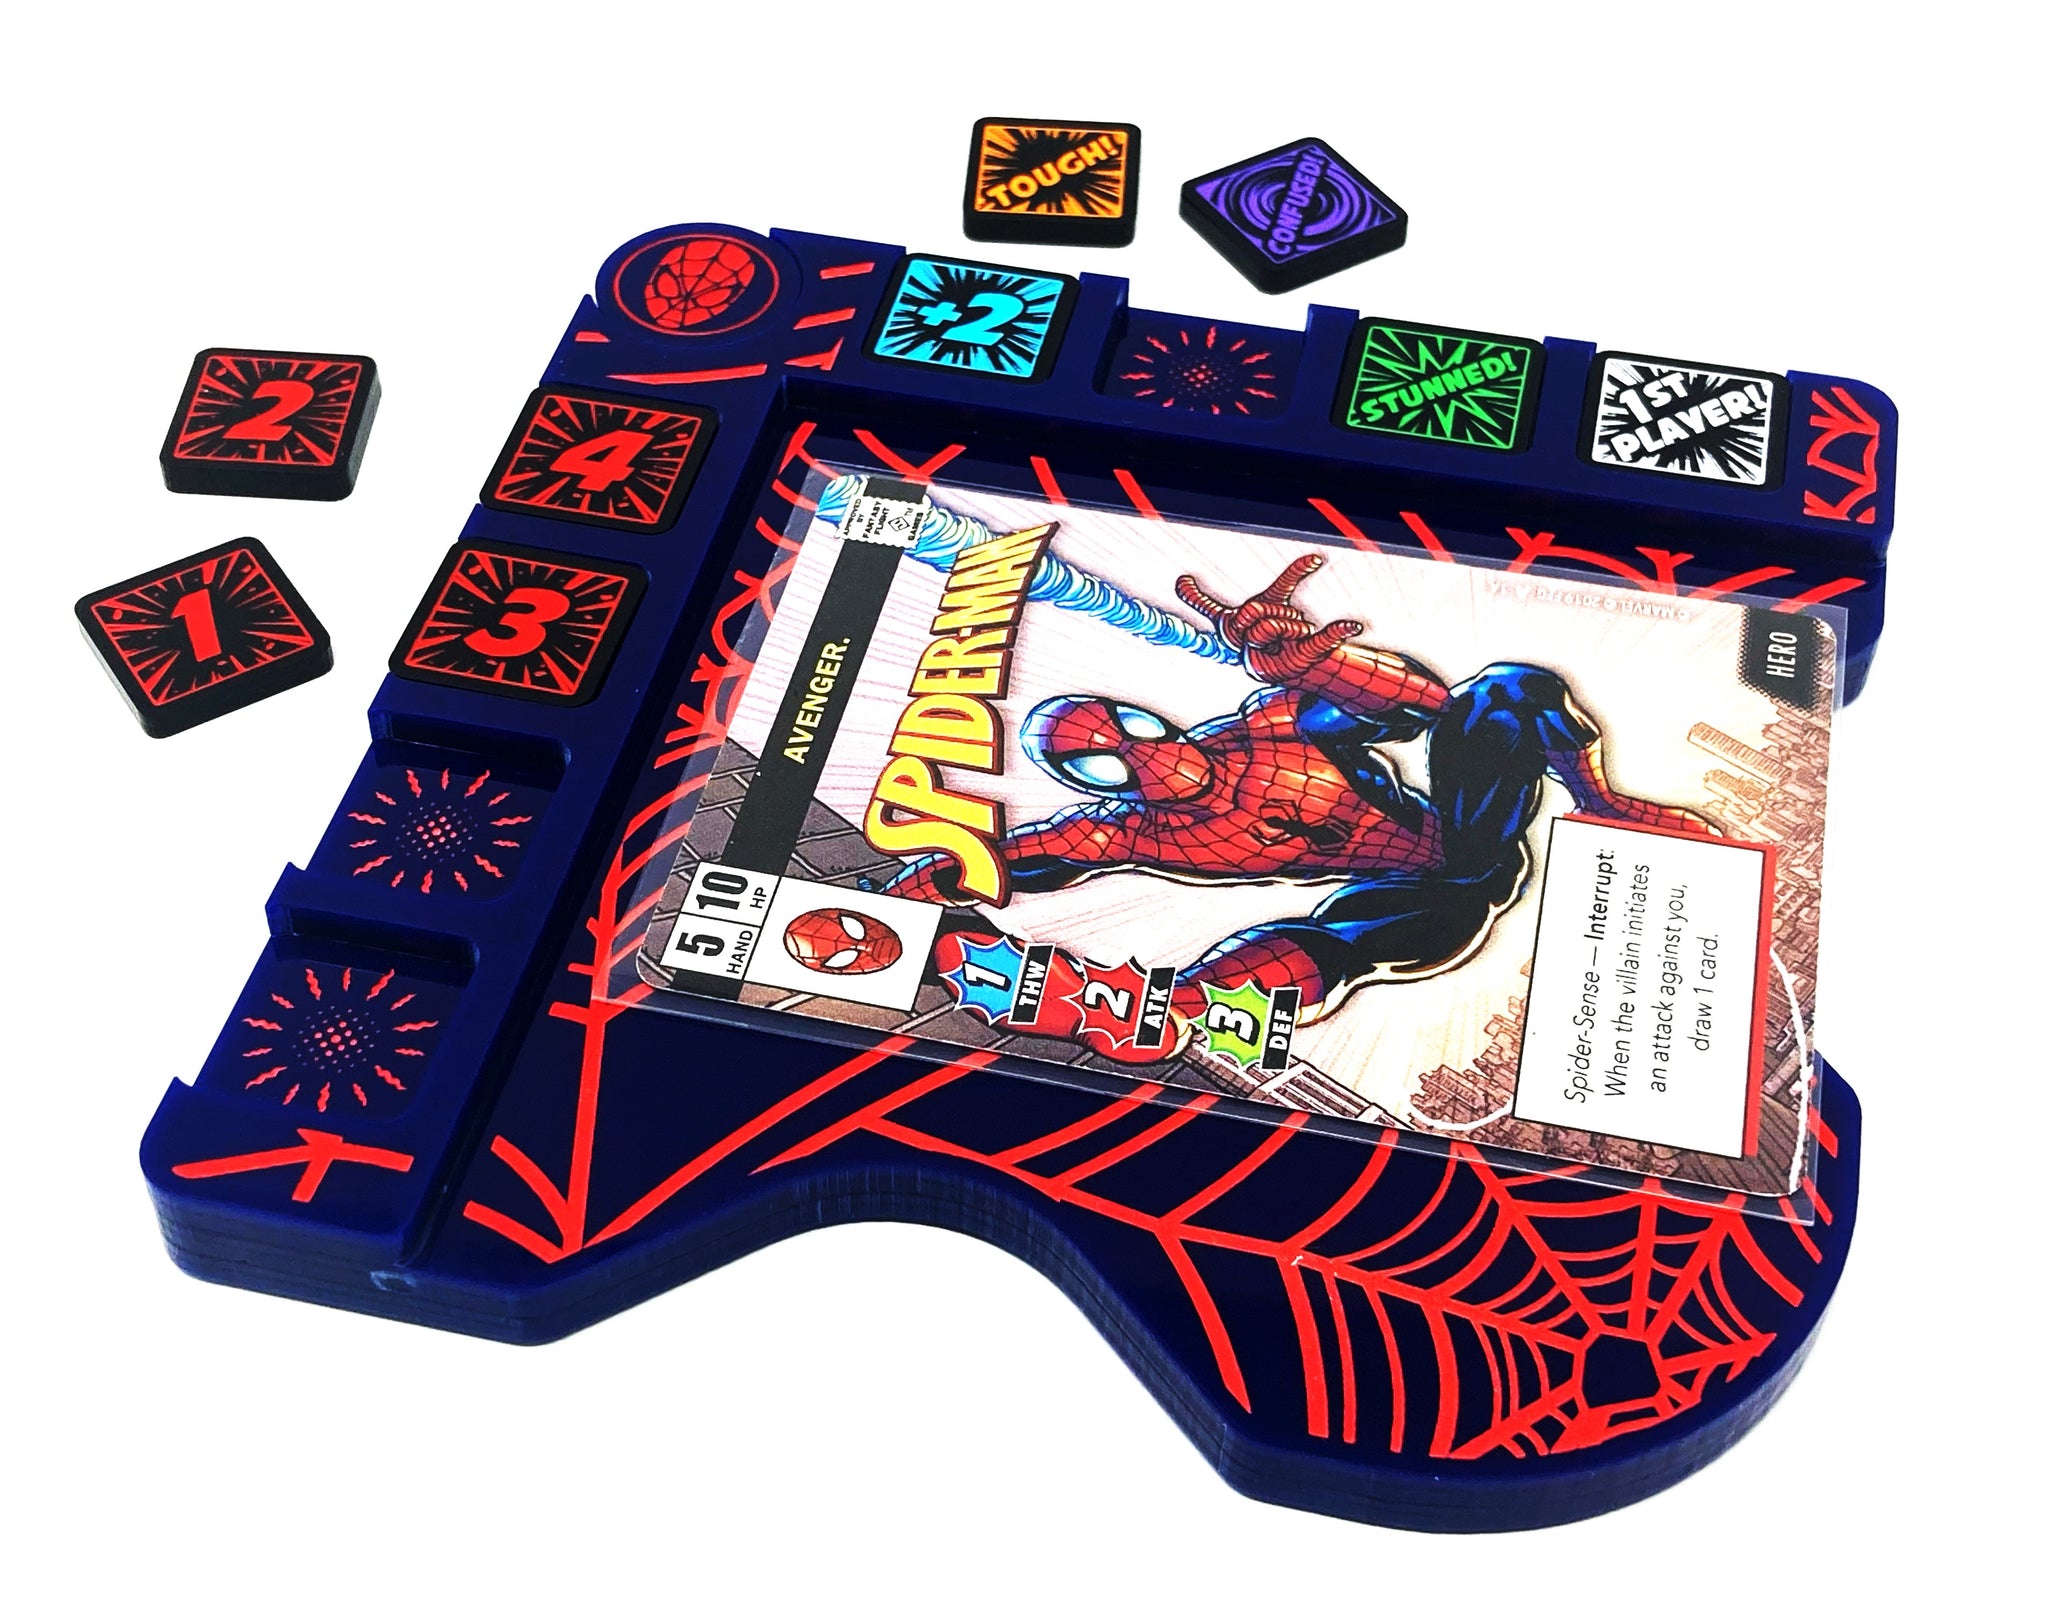 Spider-Man Themed Hero board for Marvel Champions LCG compatible, (Tokens NOT Included)